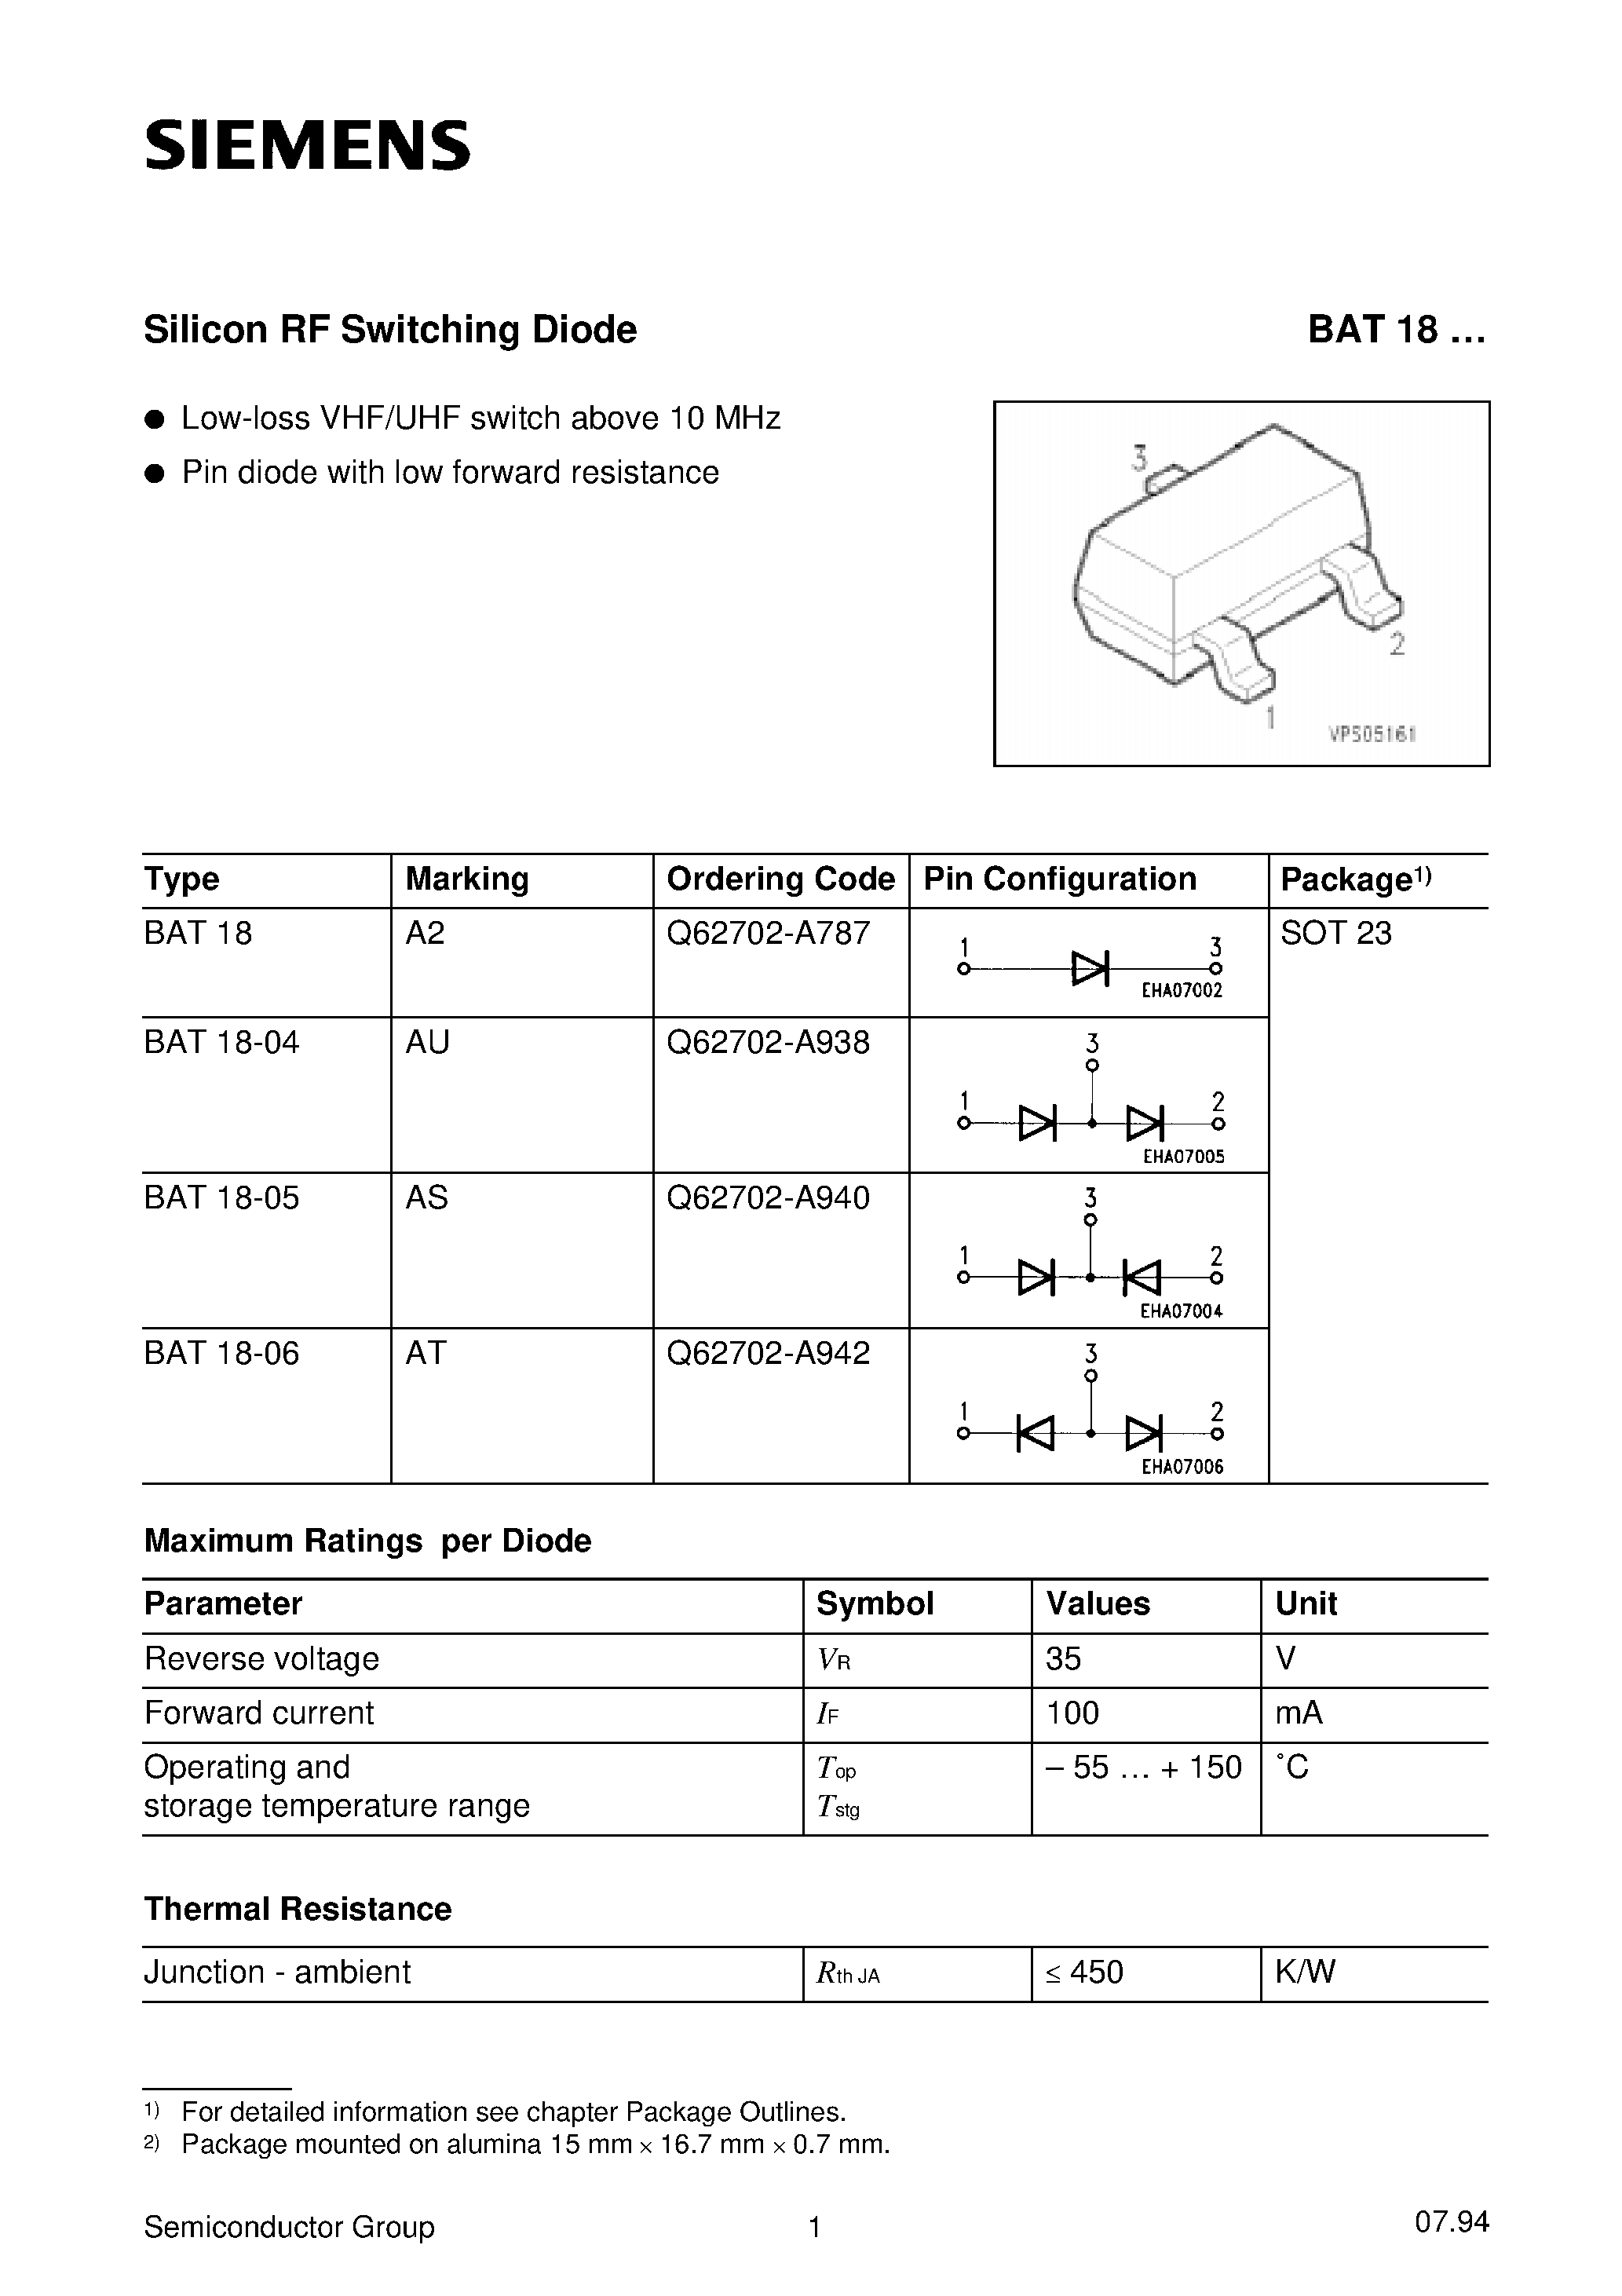 Datasheet BAT18-04 - Silicon RF Switching Diode (Low-loss VHF/UHF switch above 10 MHz Pin diode with low forward resistance) page 1